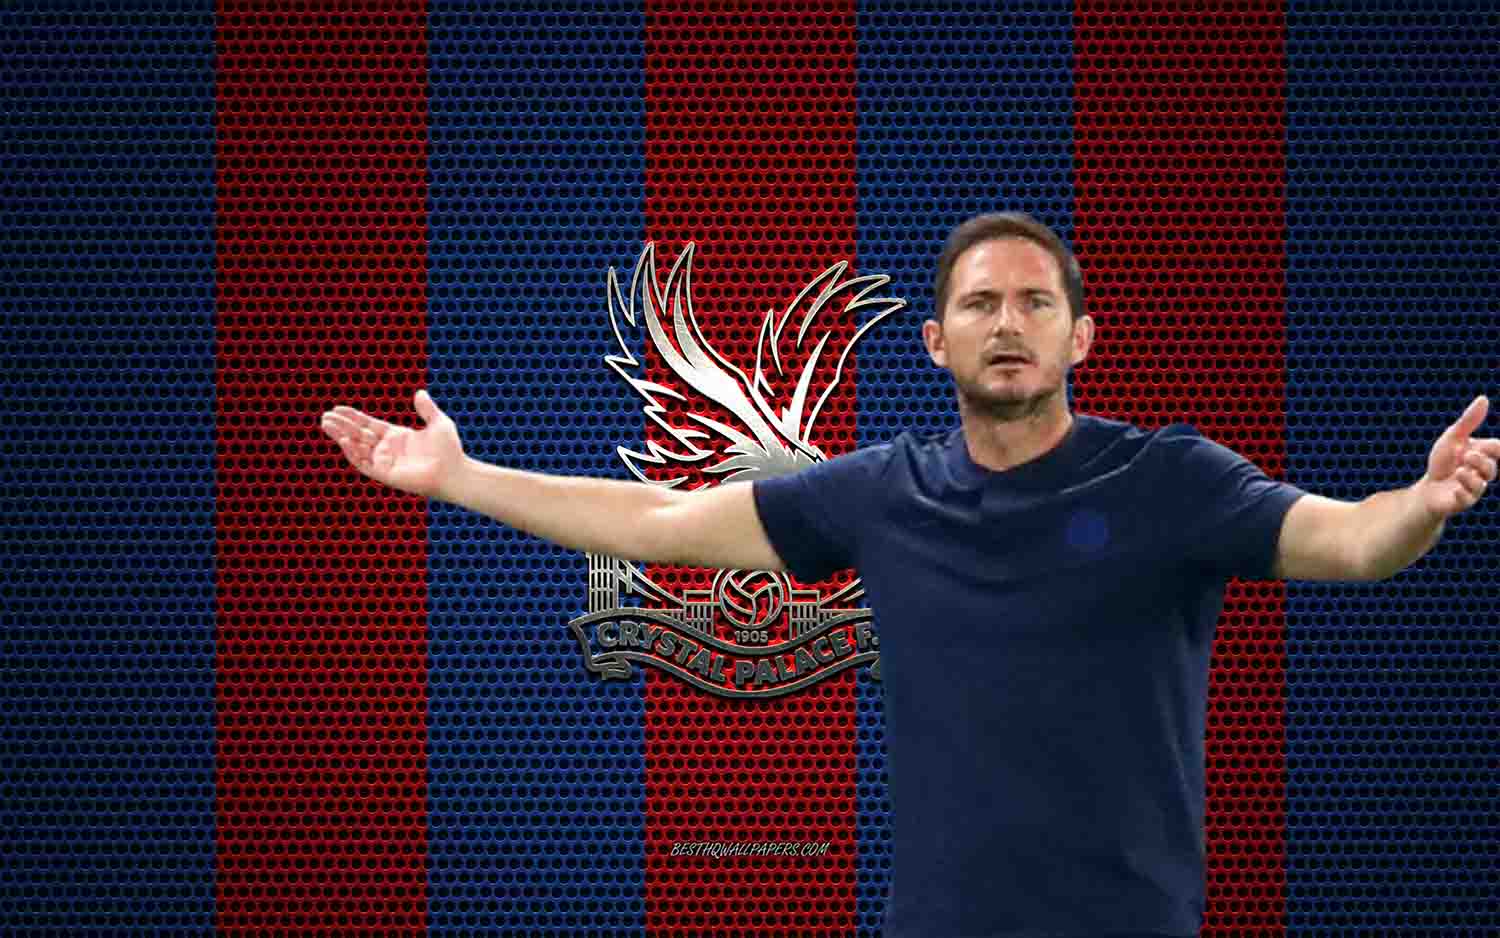 Lampard refused to lead Crystal Palace